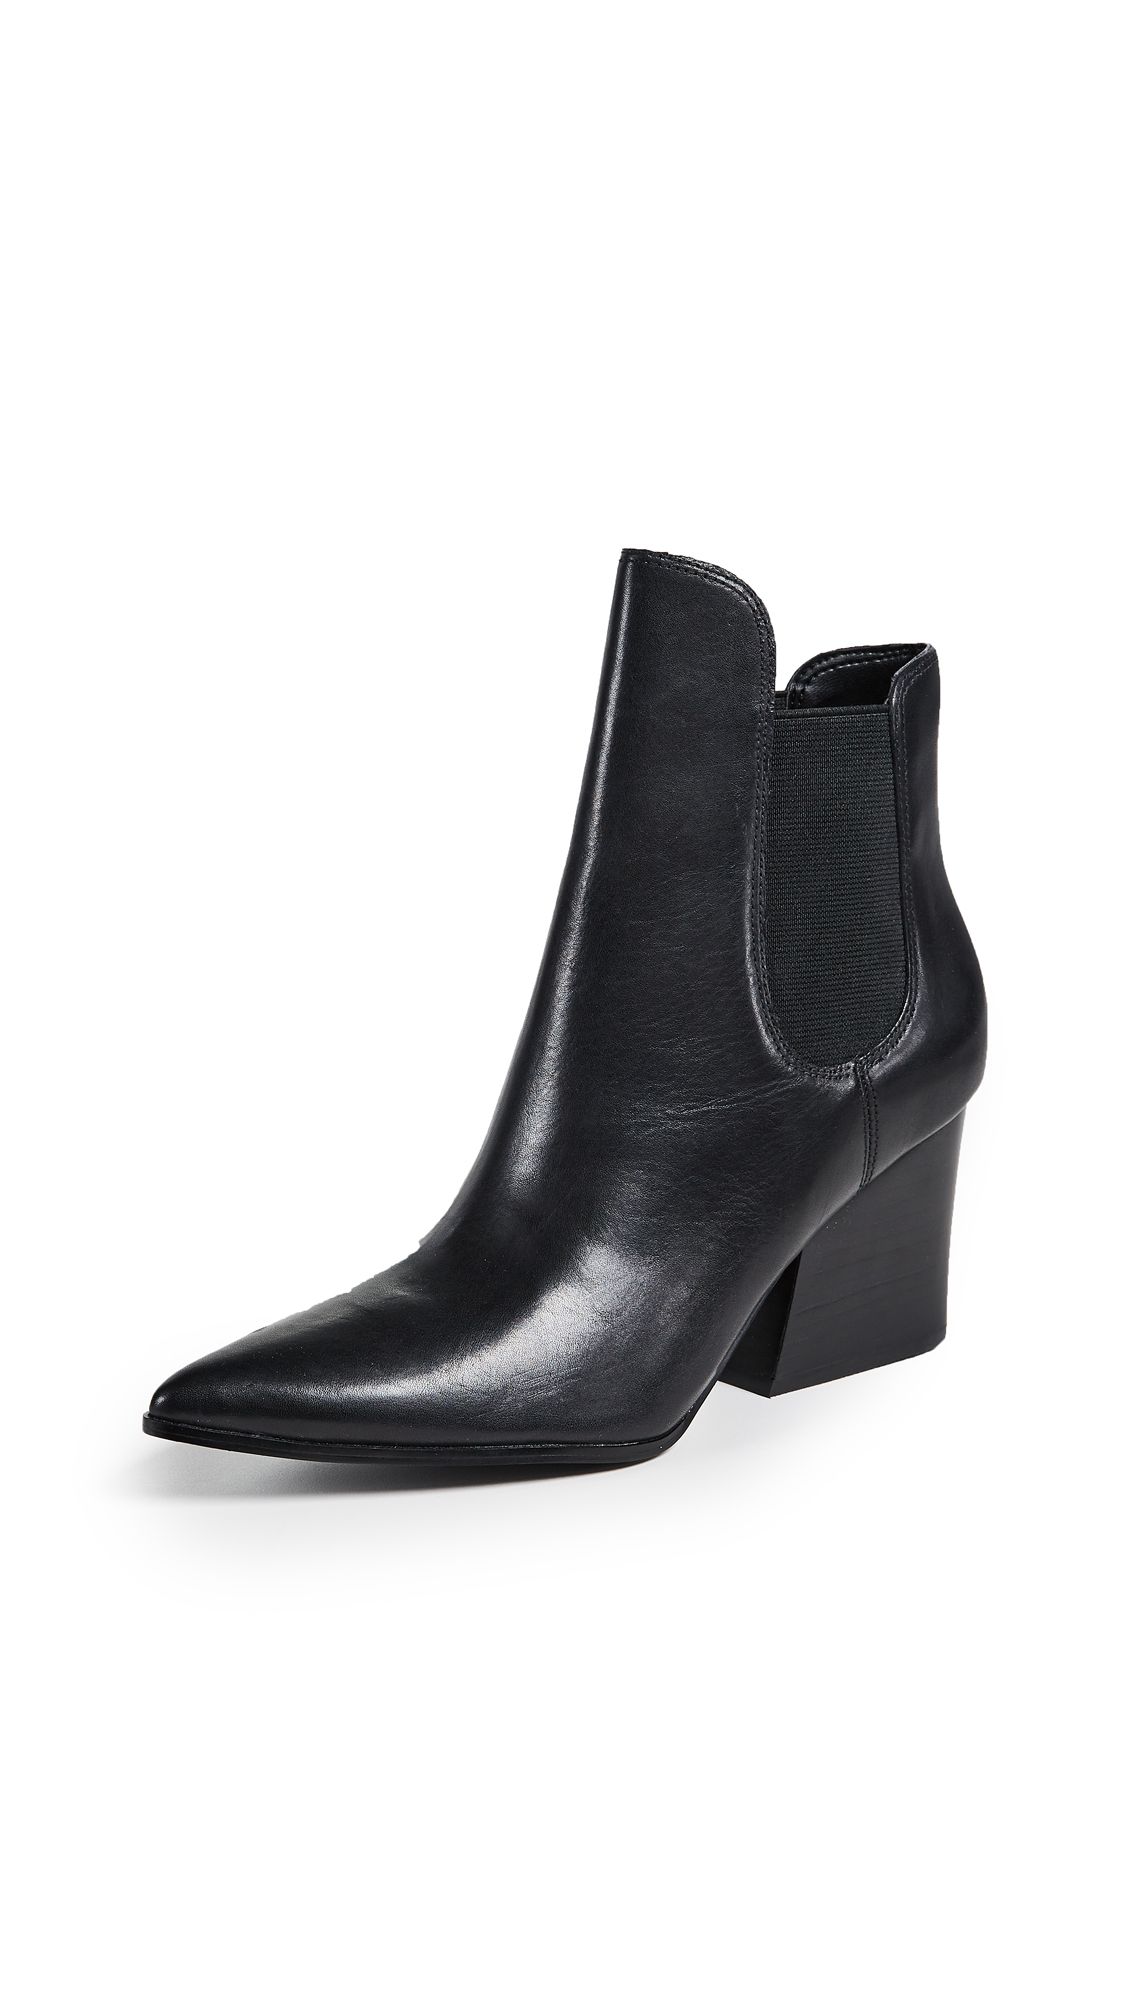 KENDALL + KYLIE Finley Leather Booties | Shopbop